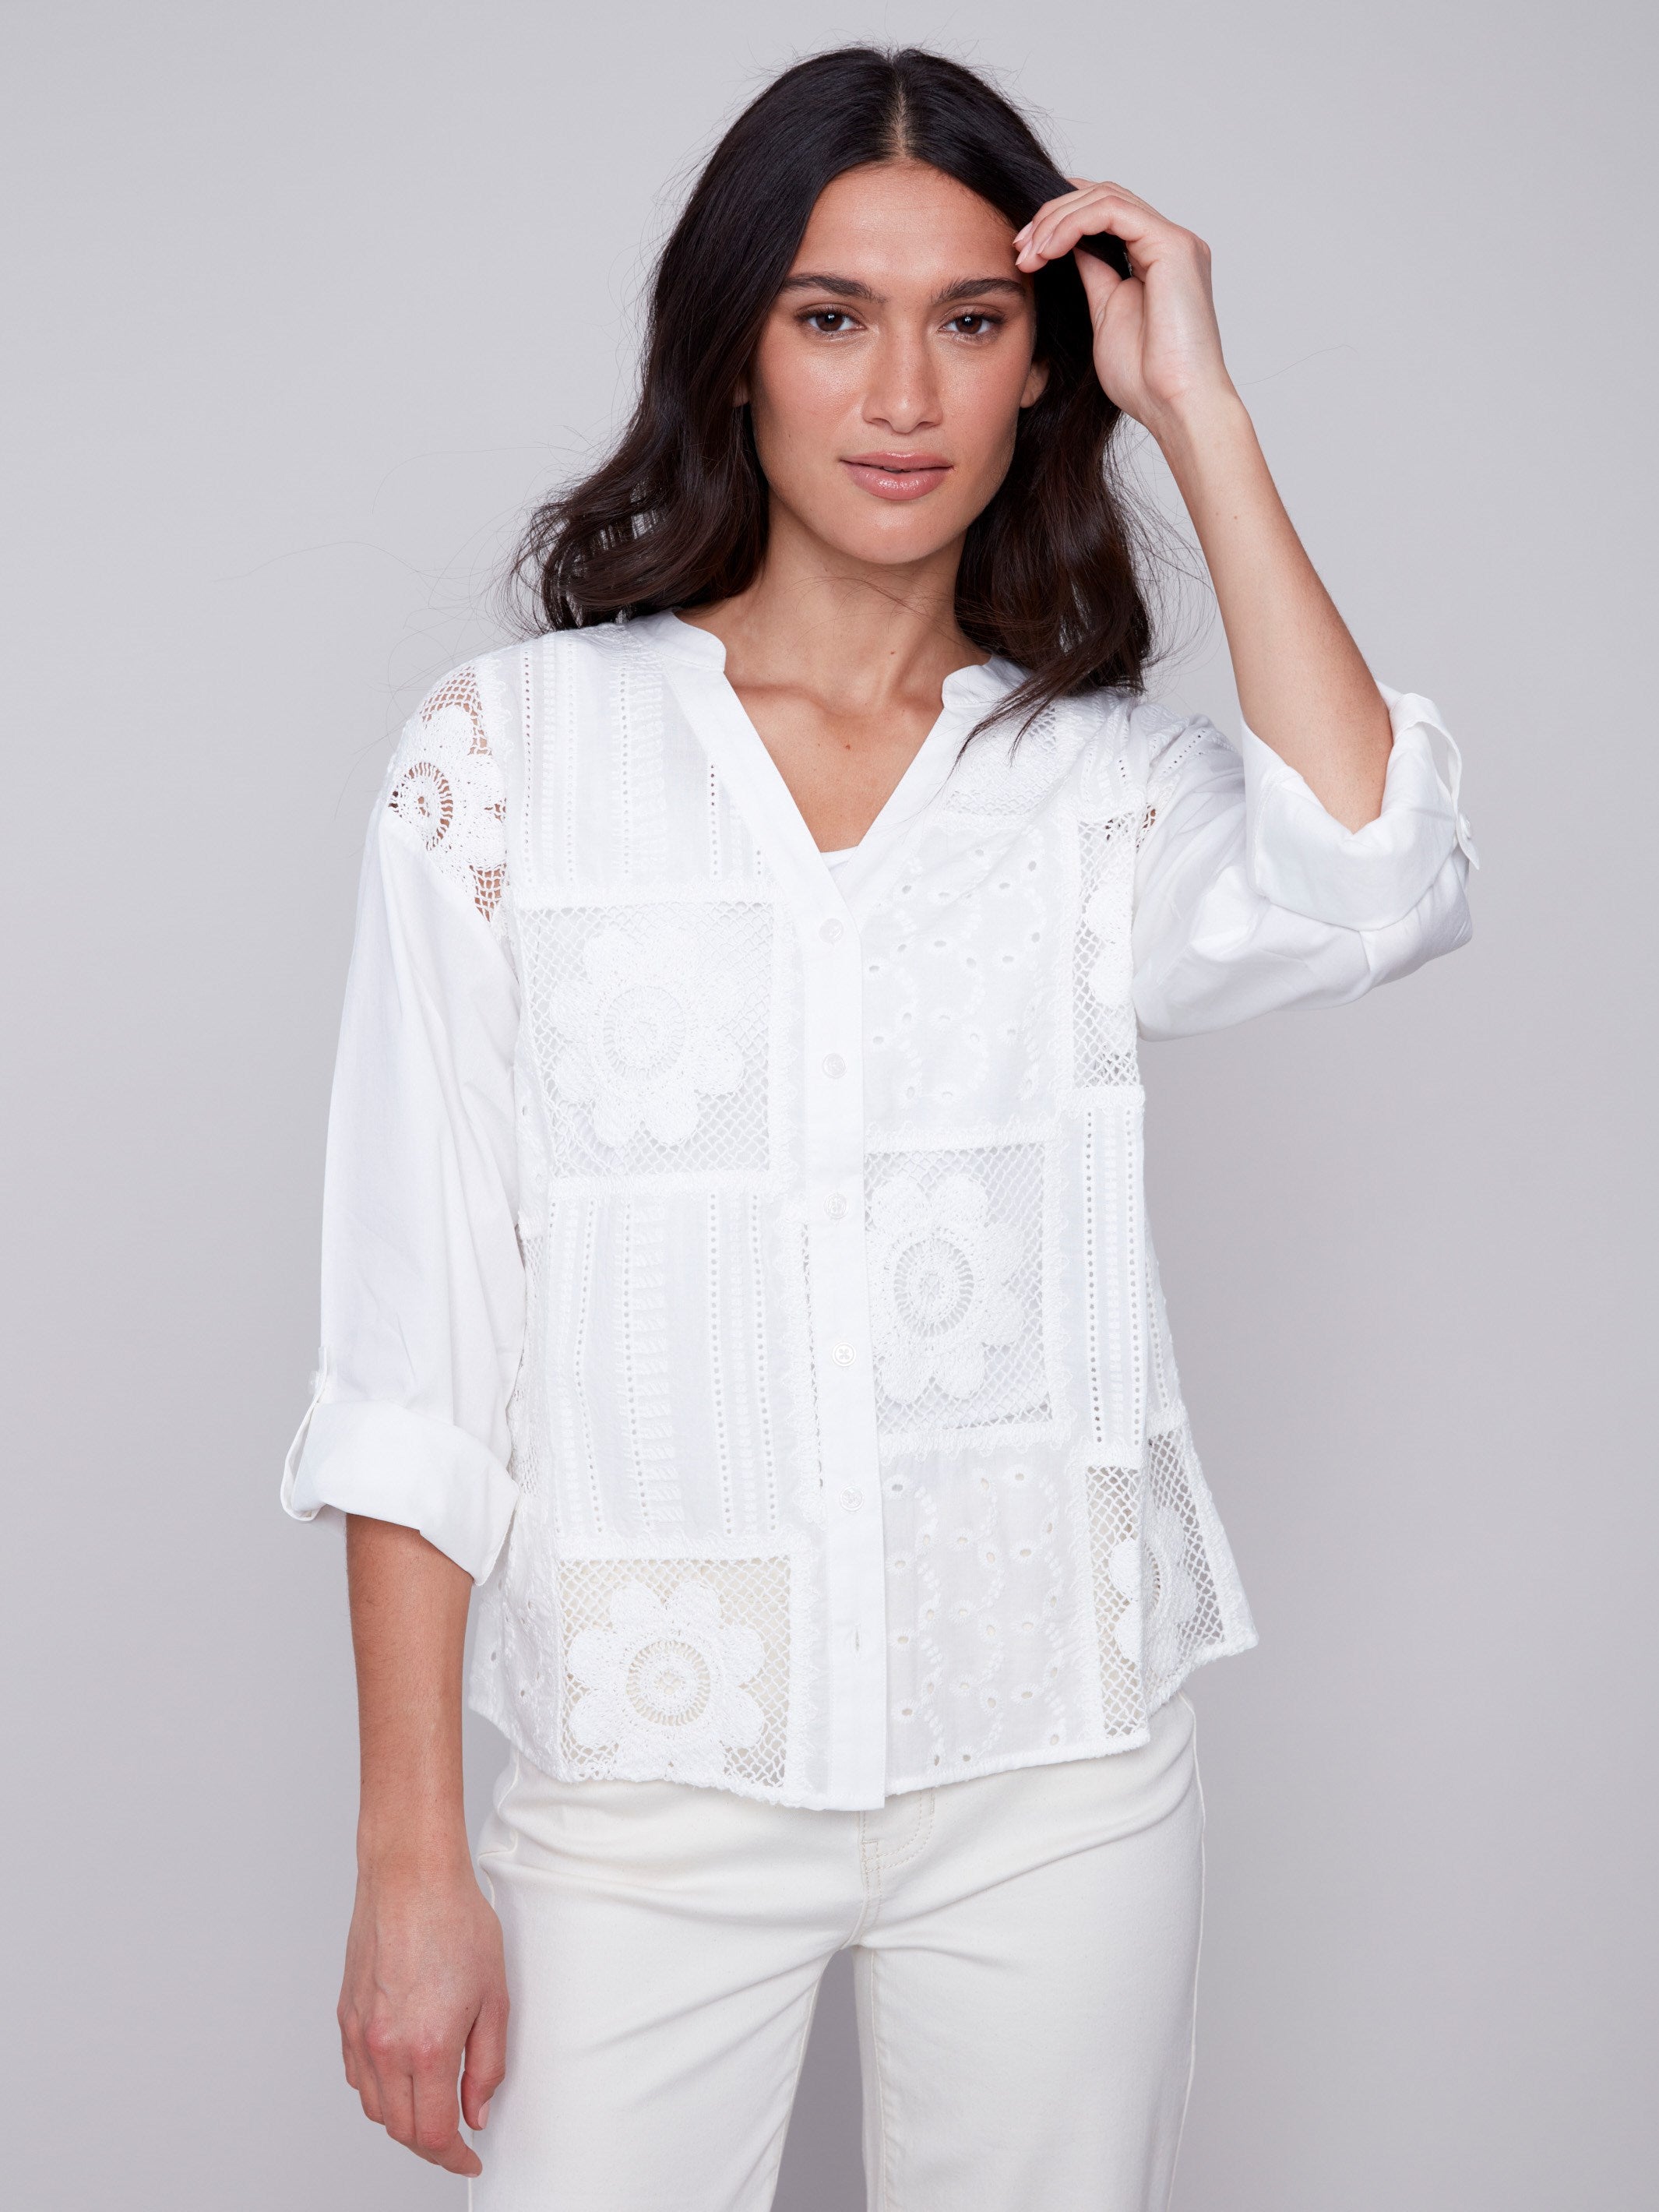 Cotton Eyelet Shirt - White - Charlie B Collection Canada - Image 4